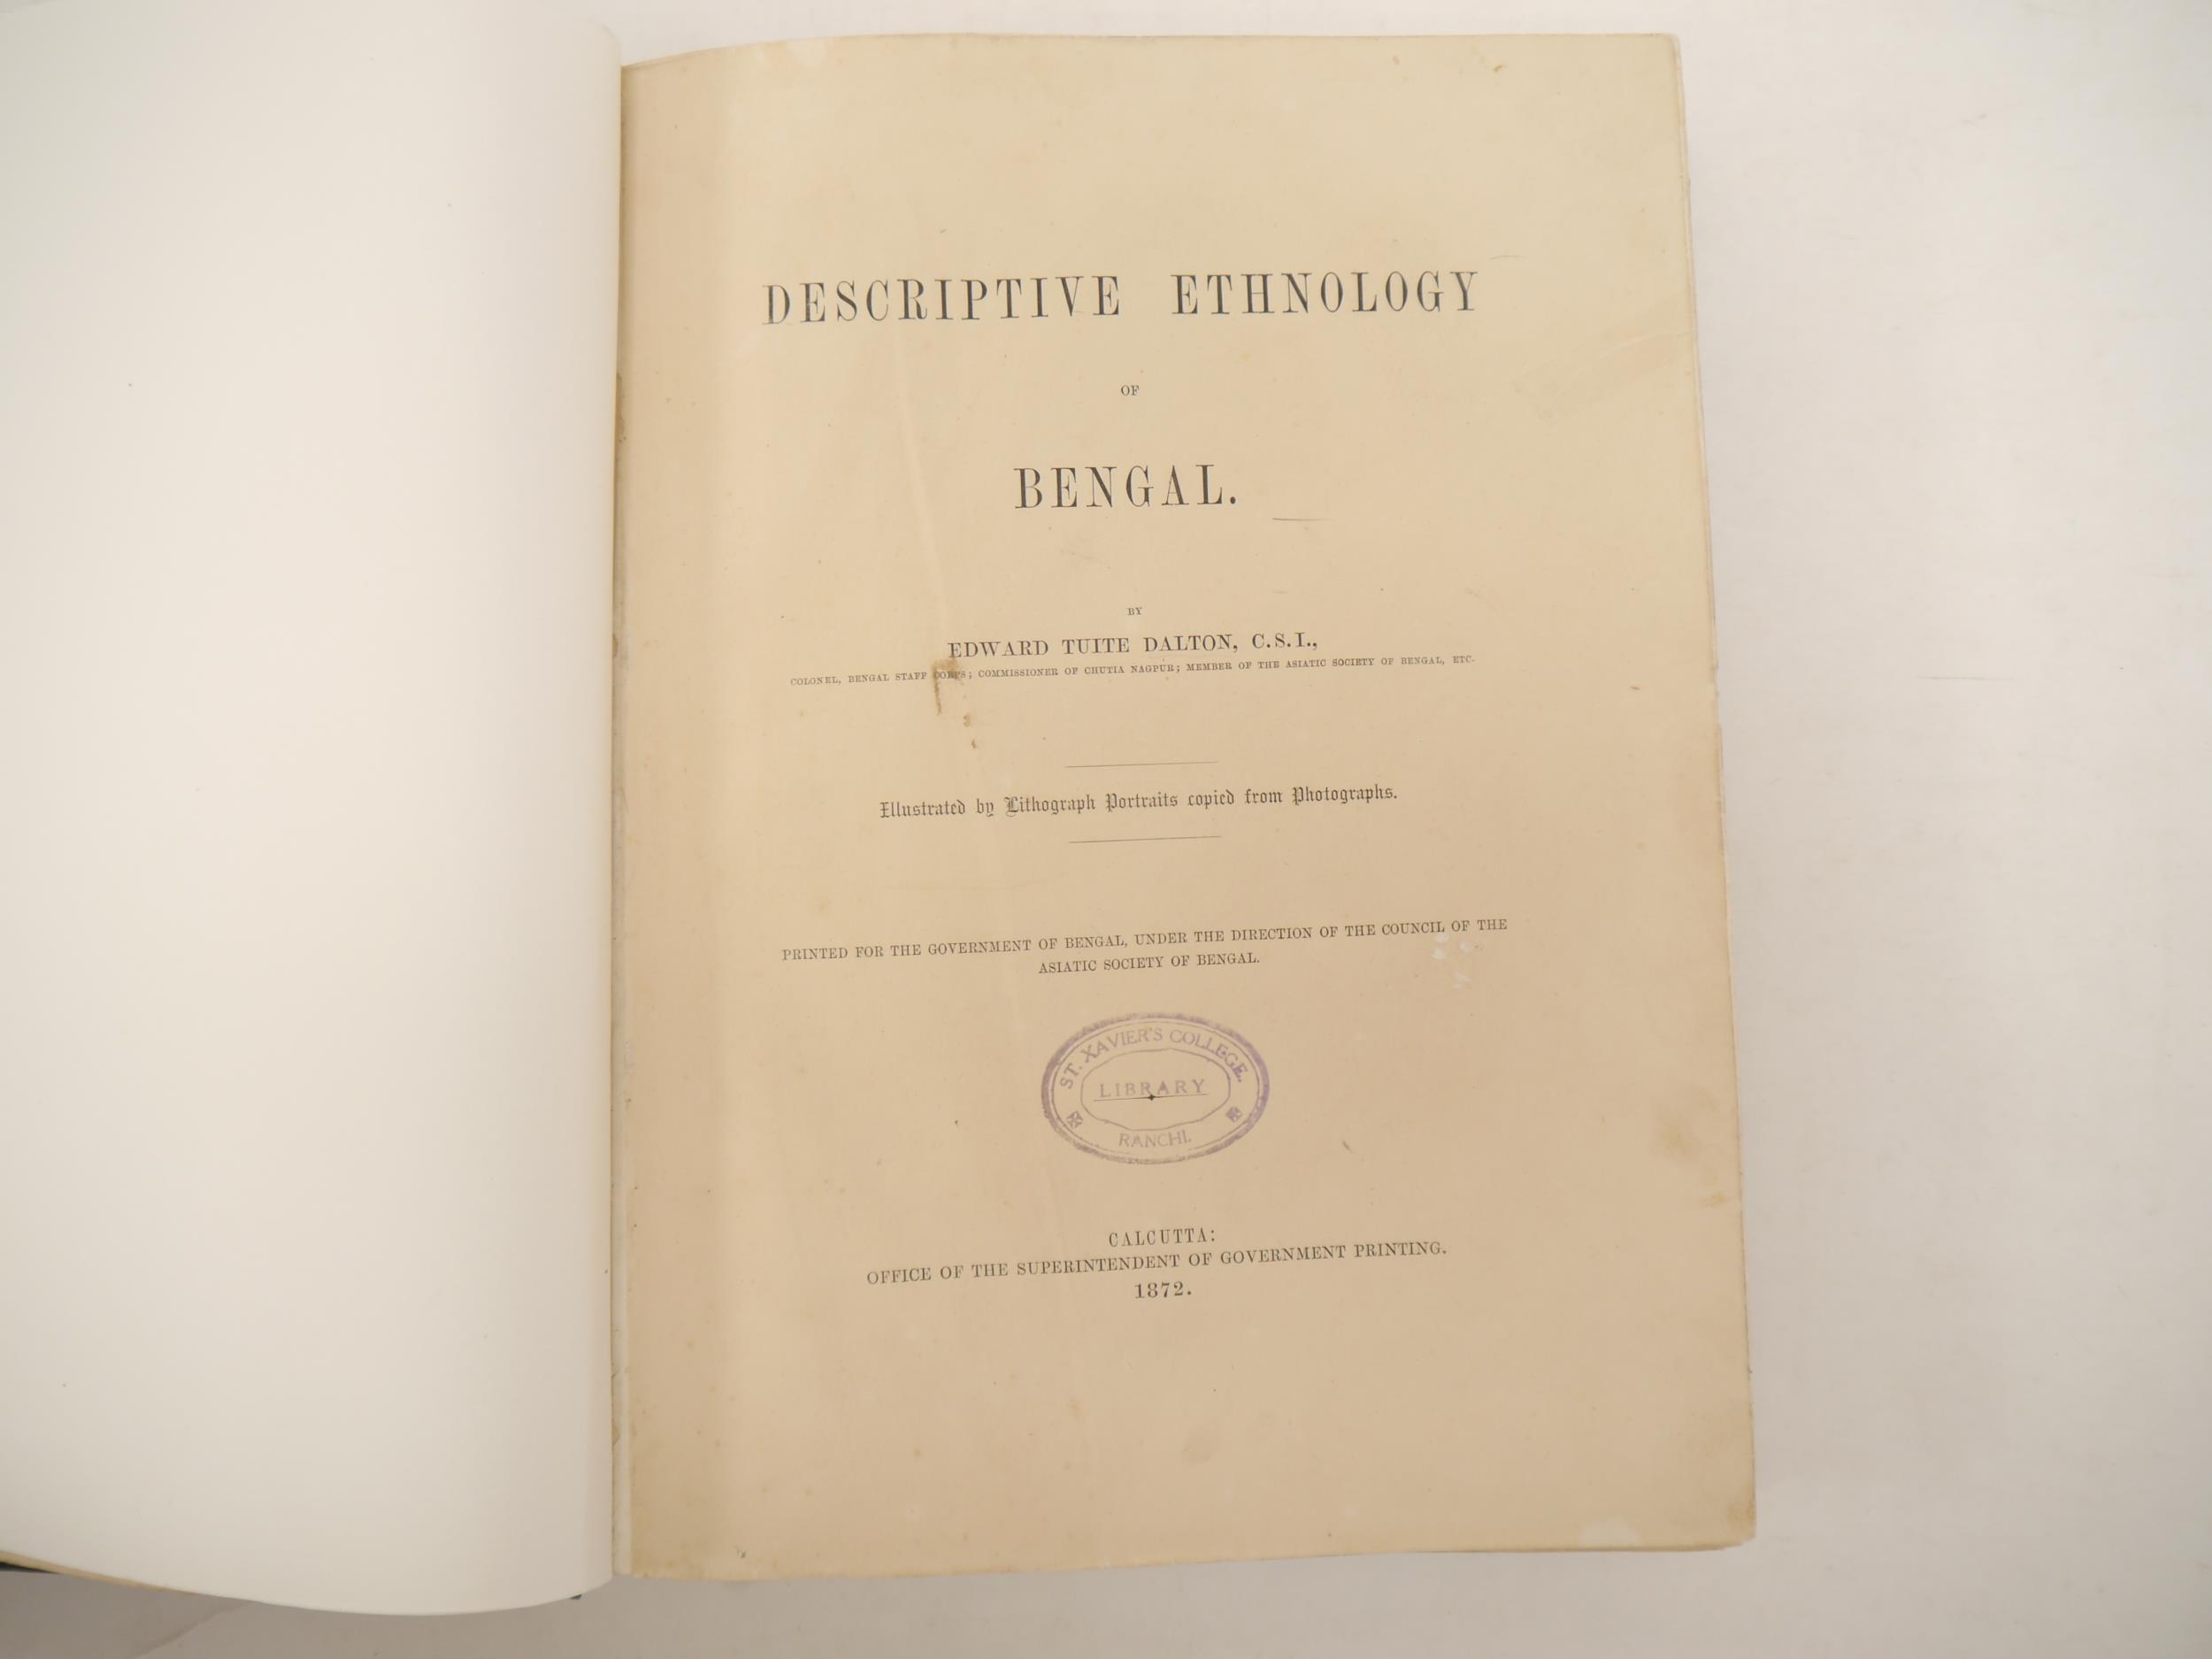 Edward Tuite Dalton: 'Descriptive Ethnology of Bengal', Calcutta, Office of the Superintendent of